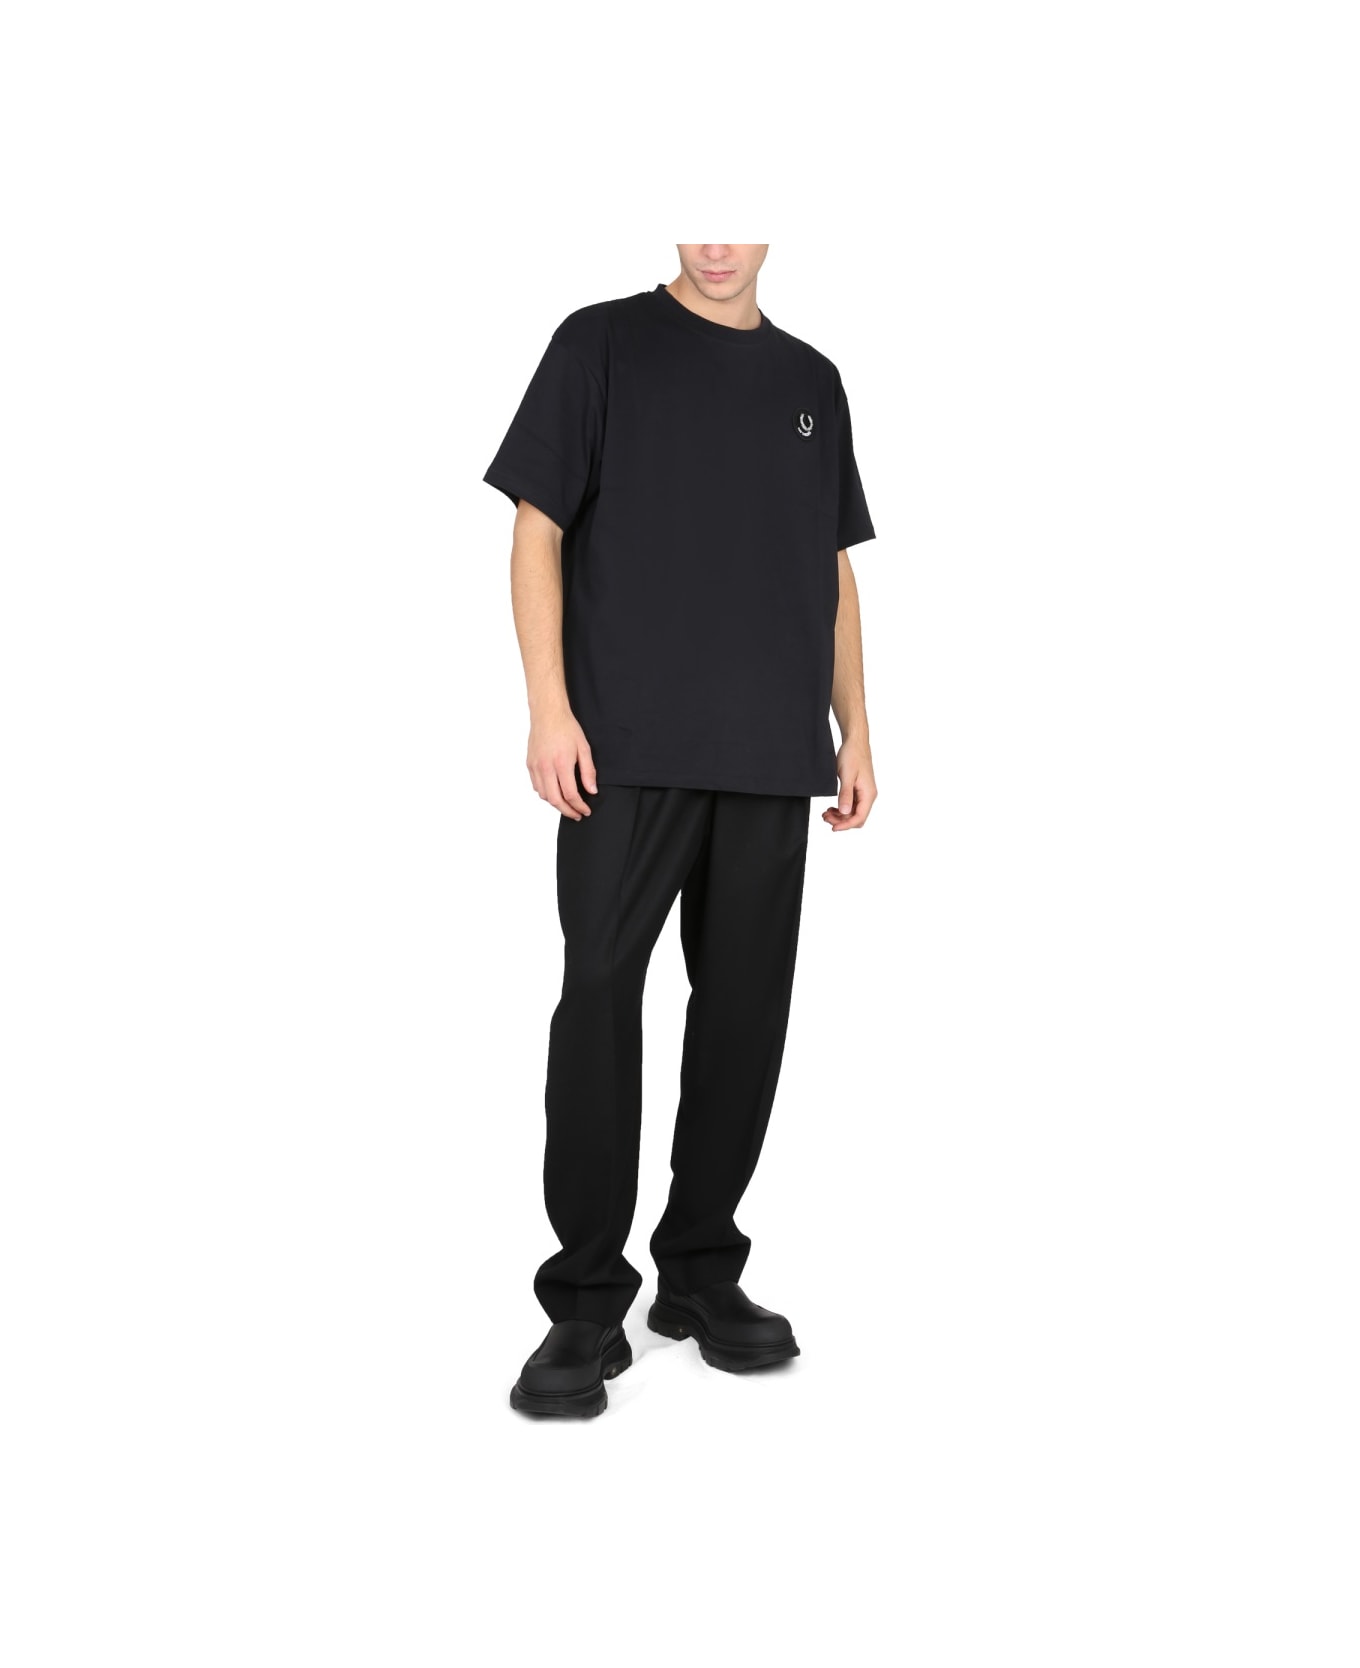 Fred Perry by Raf Simons Oversized Logo T-shirt - BLACK